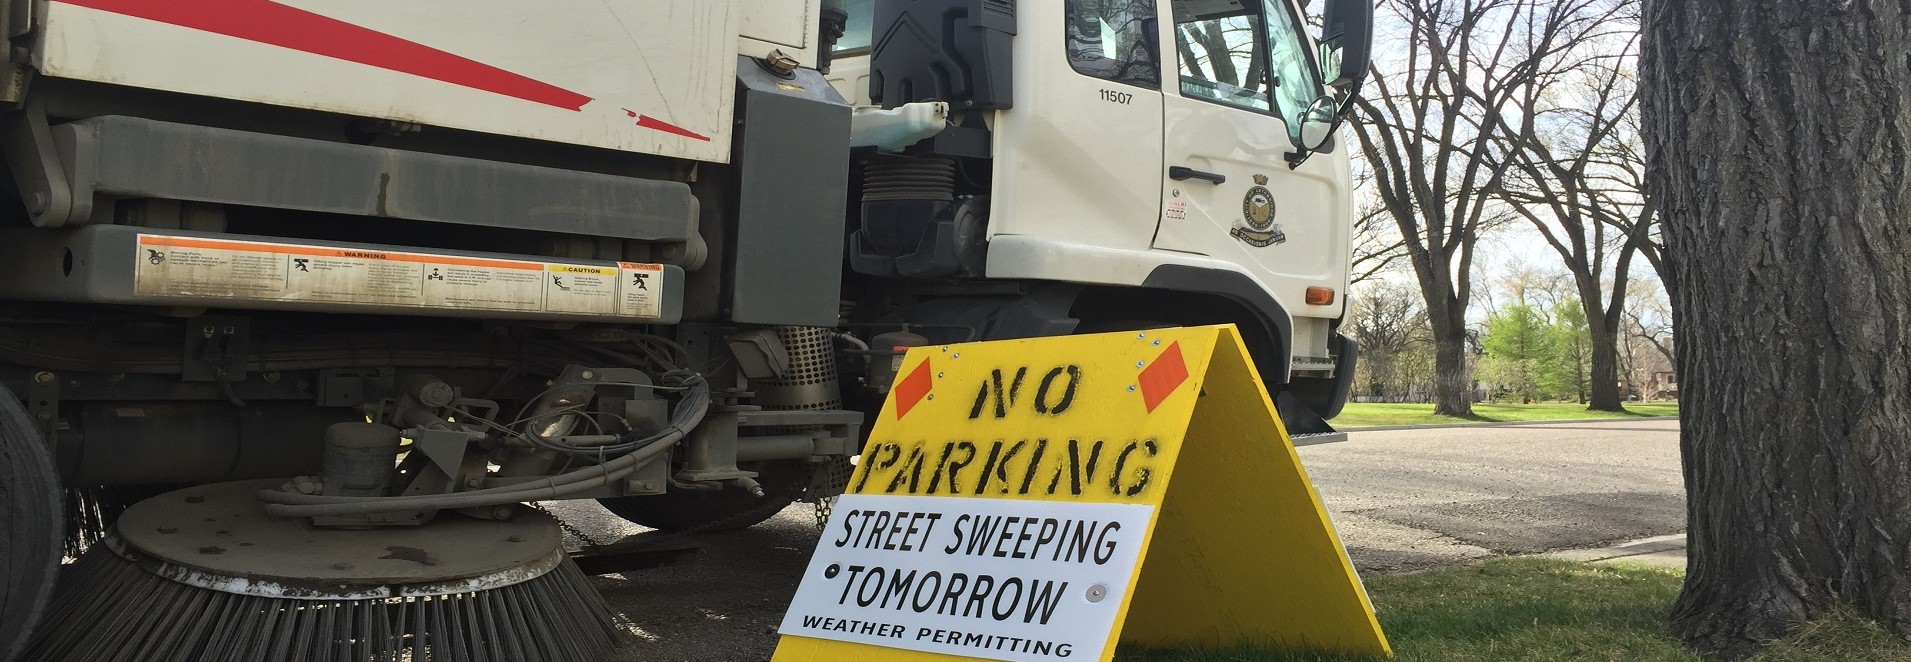 <div id=slideshow_title>Street Sweeping April 12-14</div> <br>Dependent on weather conditions, street sweeping is scheduled for Wednesday, April 12 - Friday, April 14. Watch for signage and we ask that for the best possible clean that vehicles are parked off the roads during this time. 